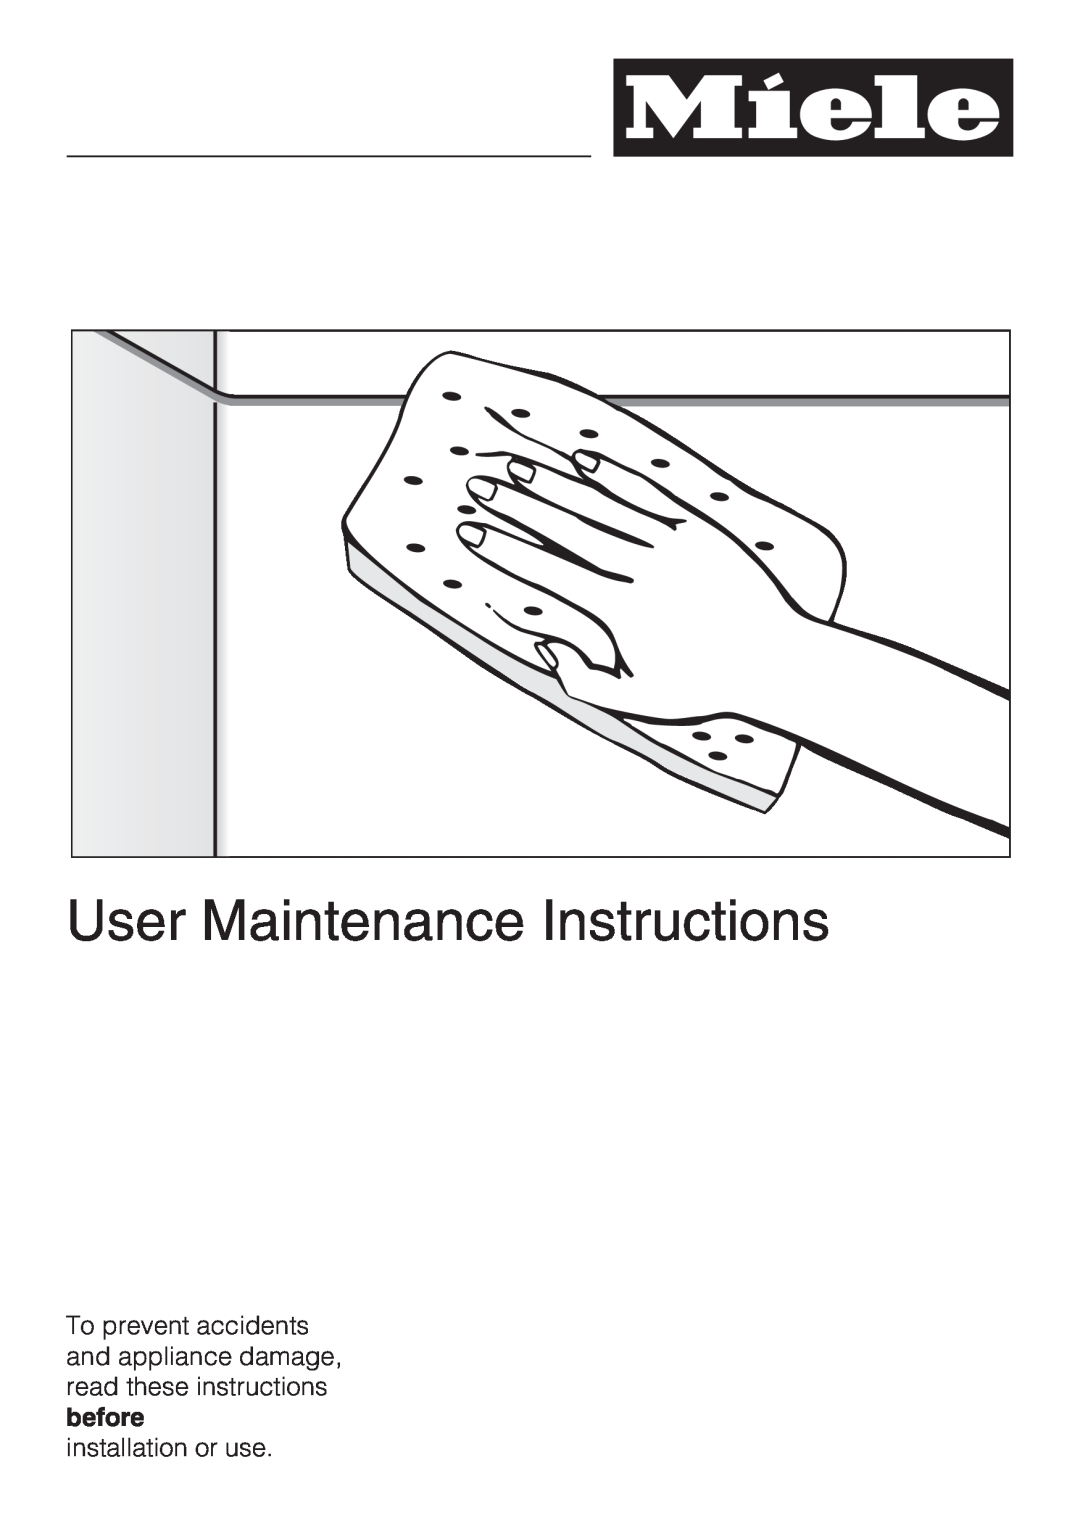 Miele G2142 operating instructions User Maintenance Instructions, installation or use 